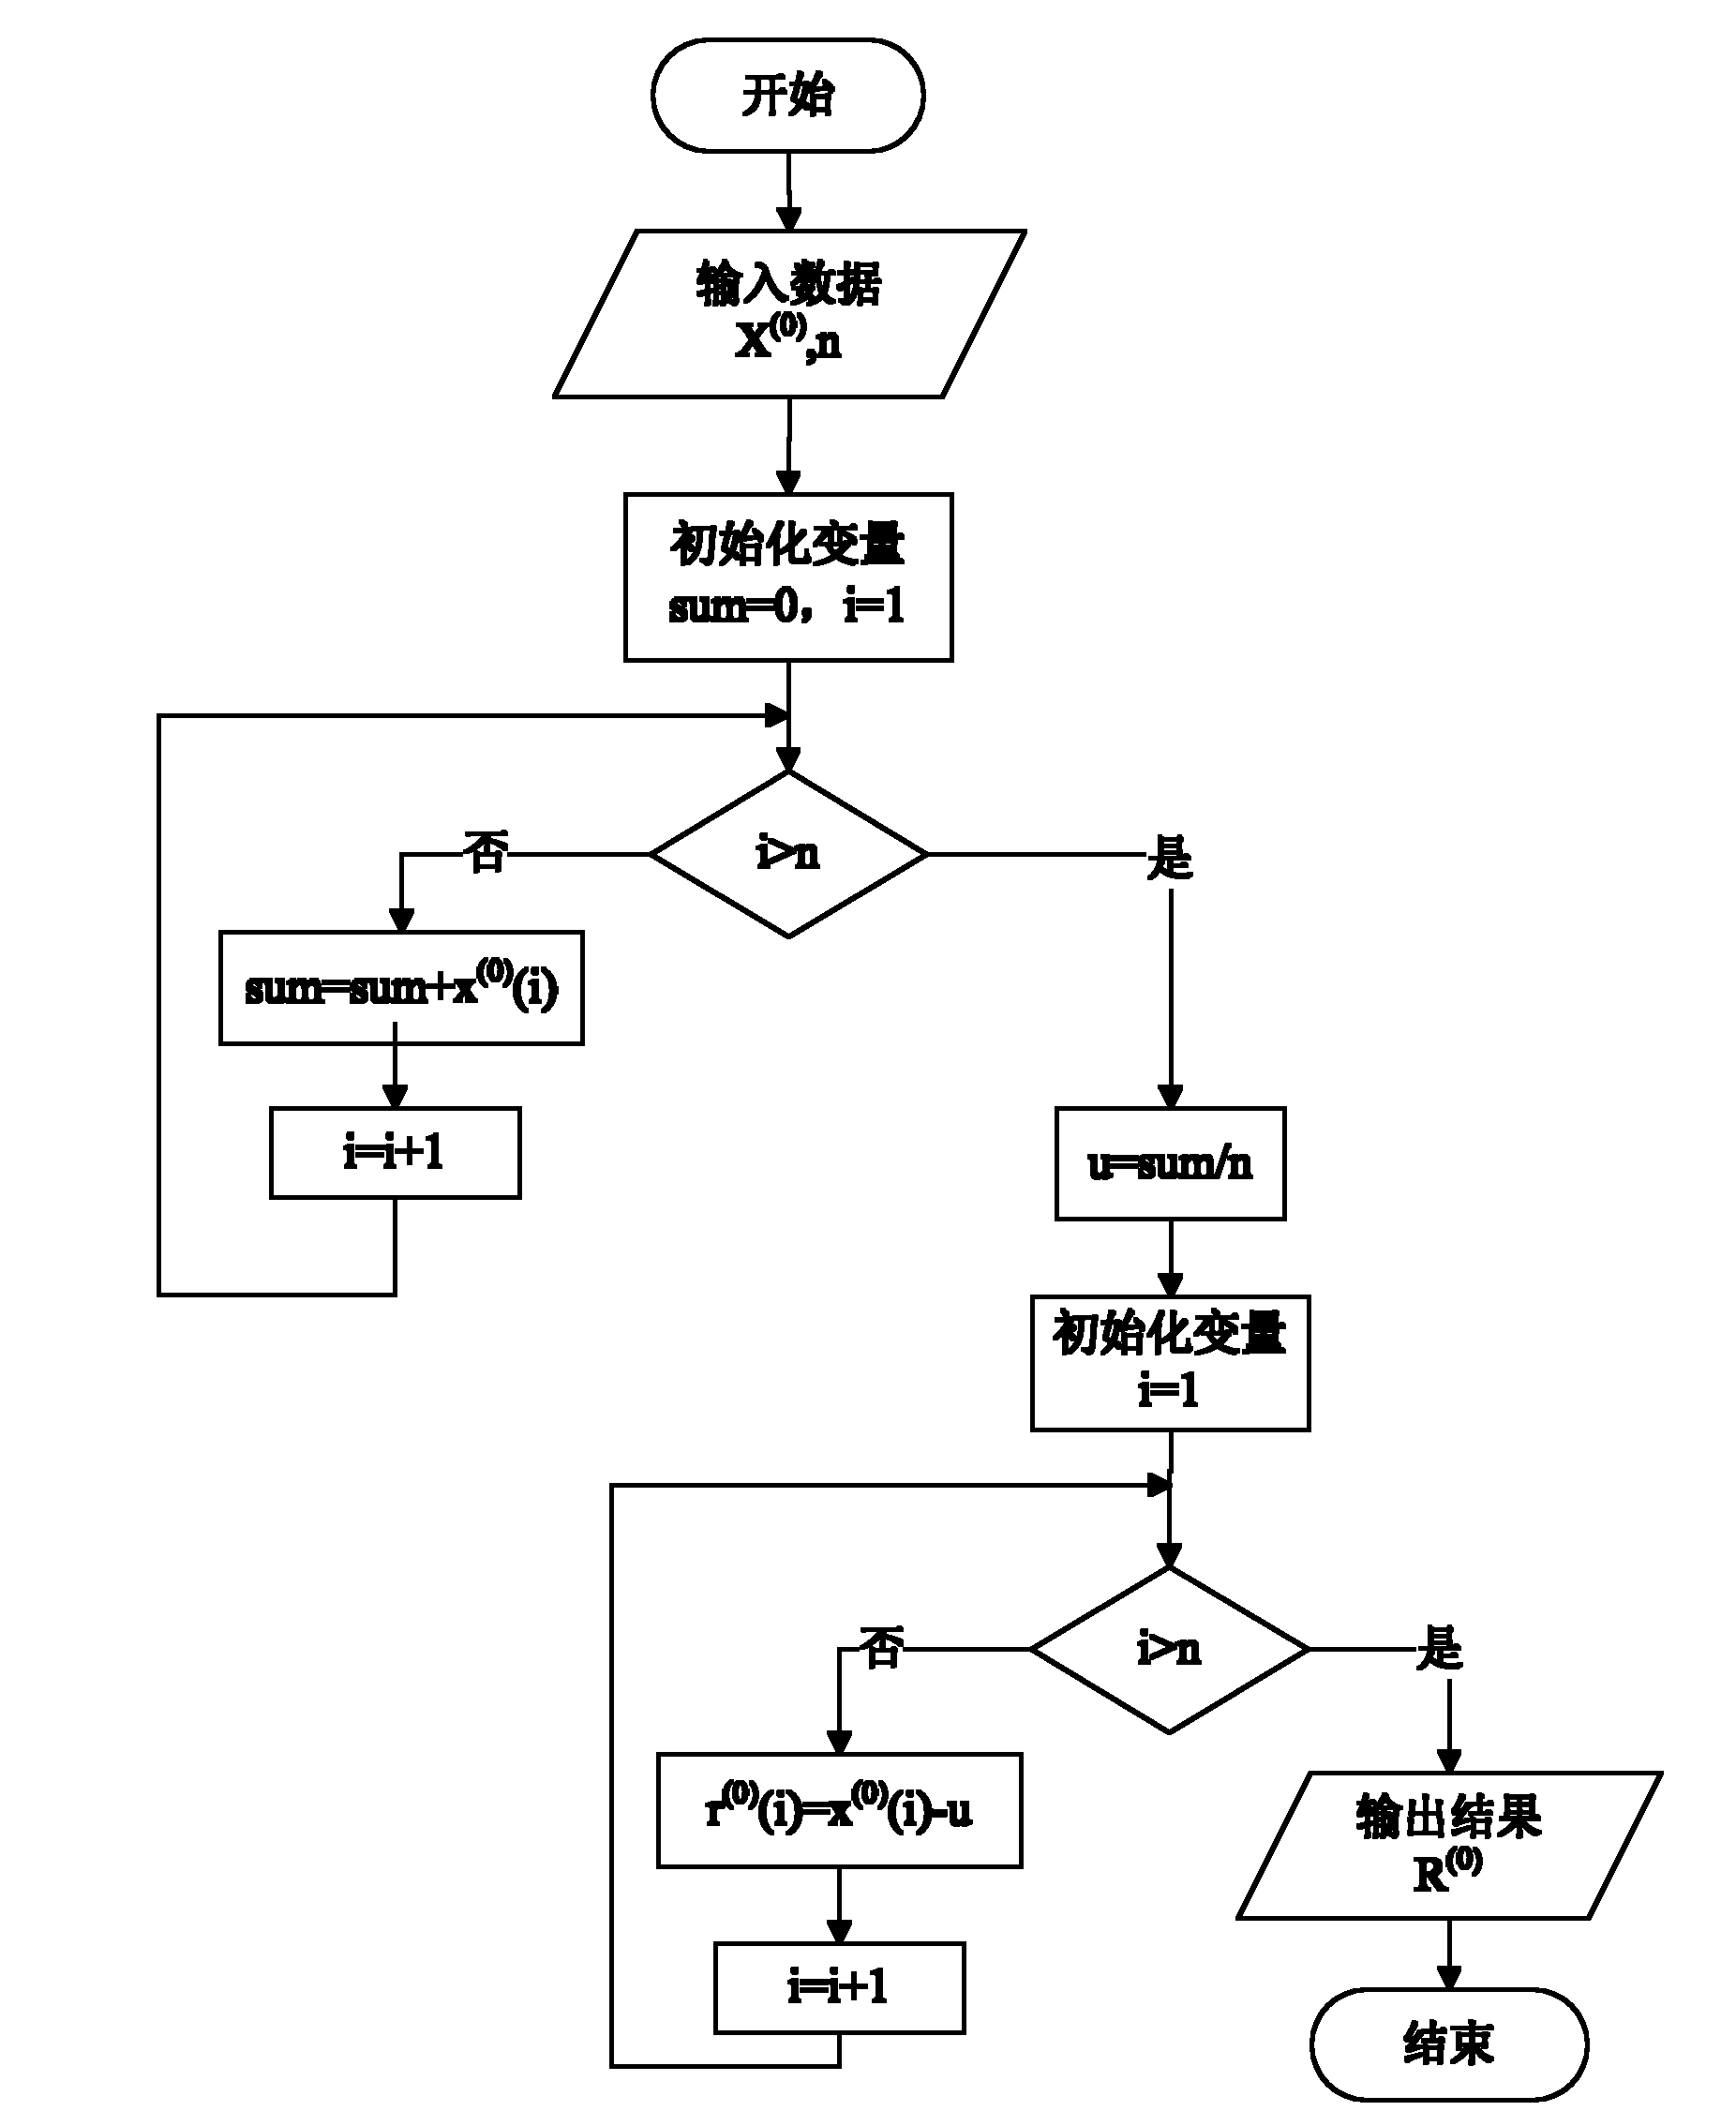 Method for forecasting evenly distributed live data